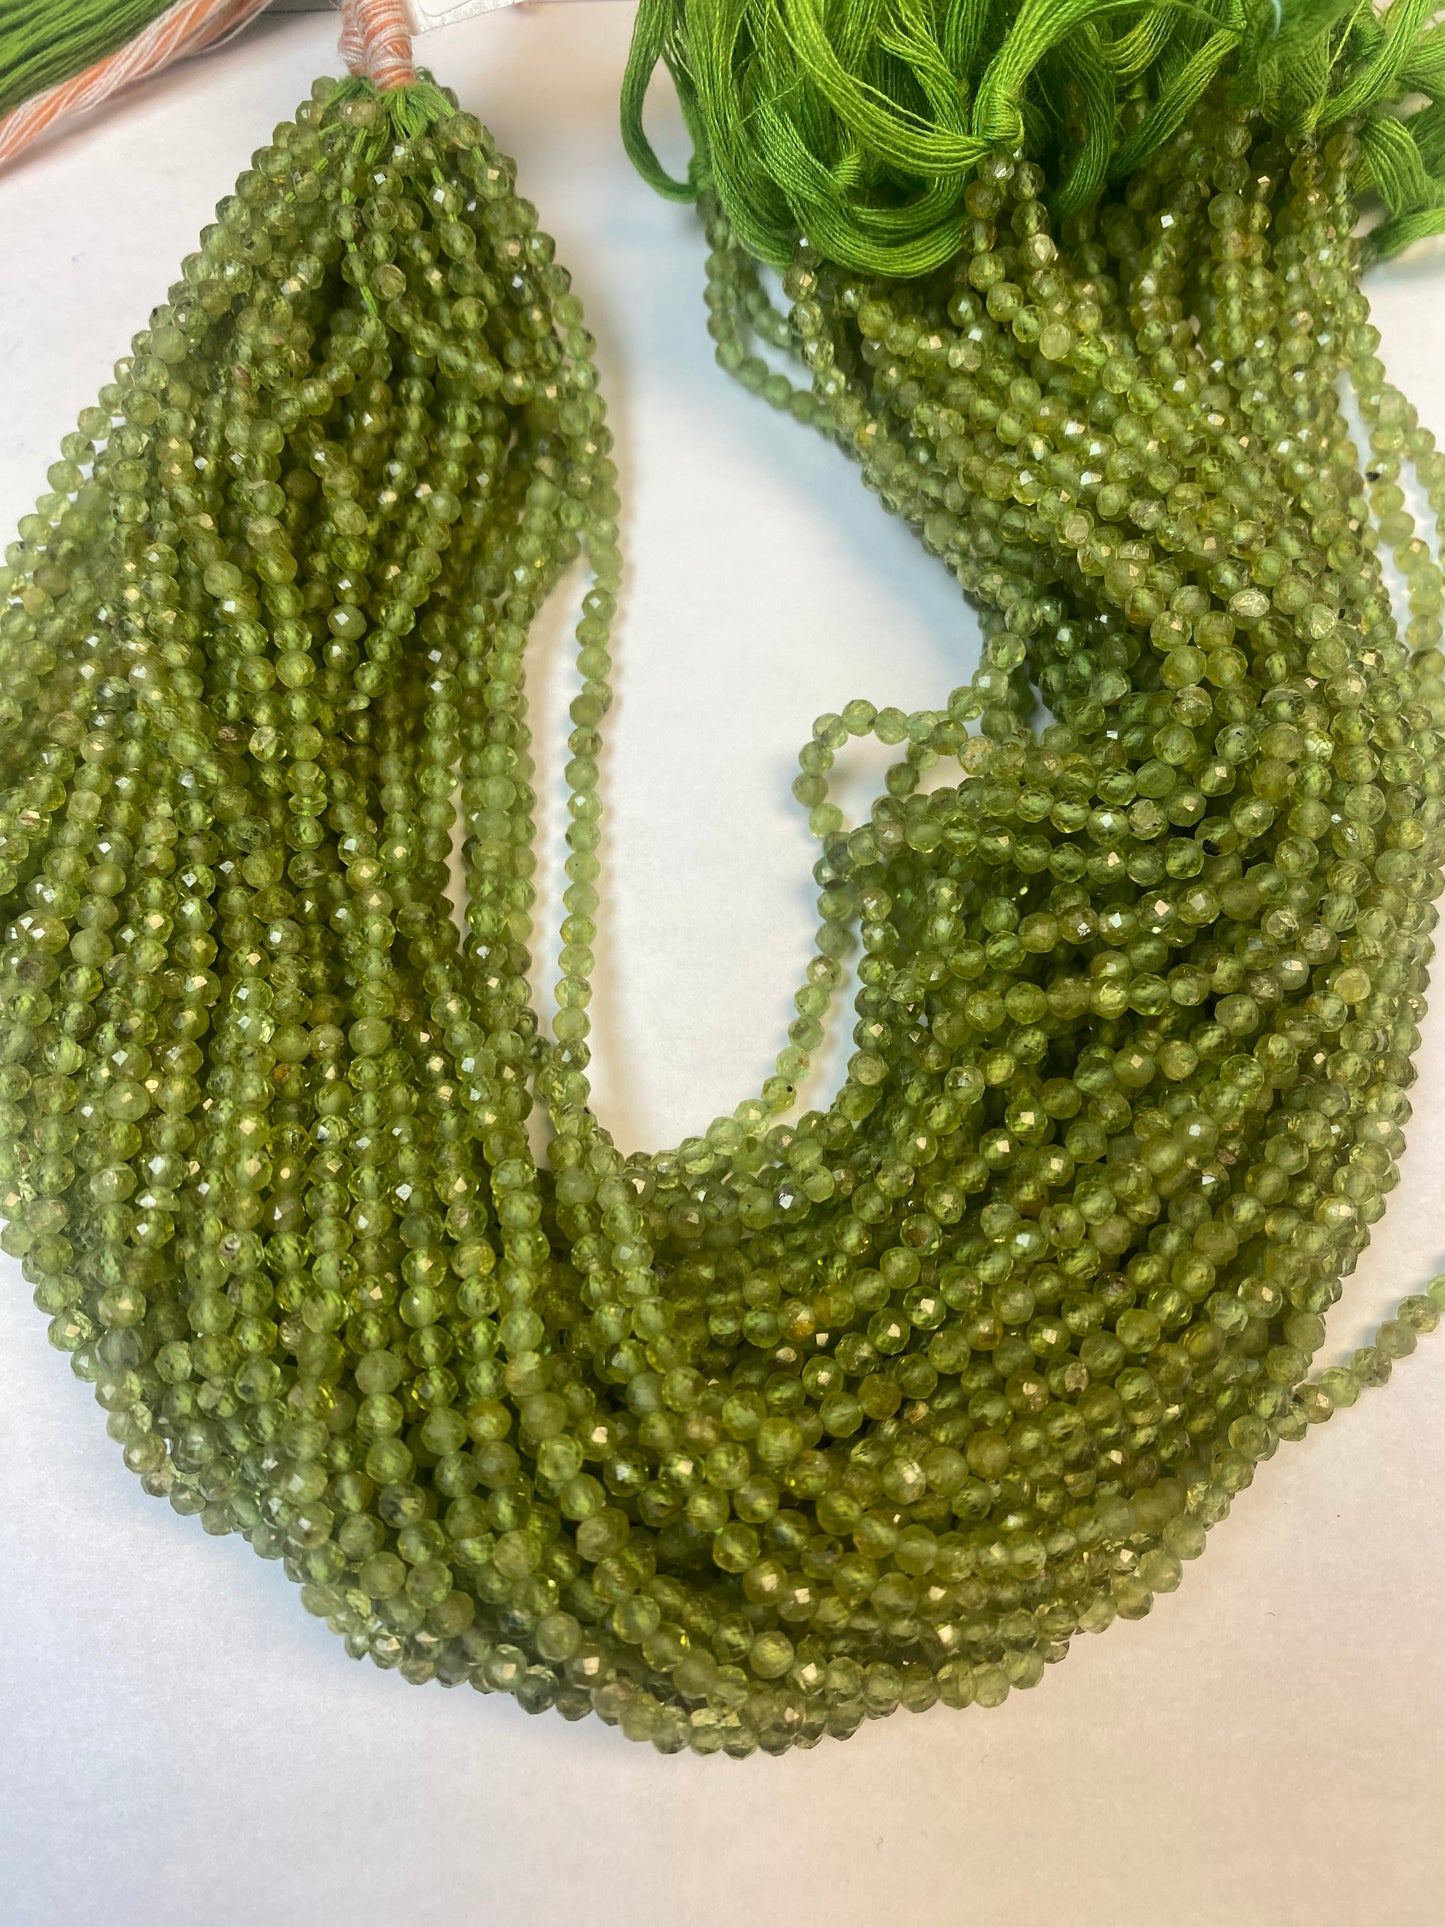 PERIDOT BEADS ROUND FACETED 3-4MM